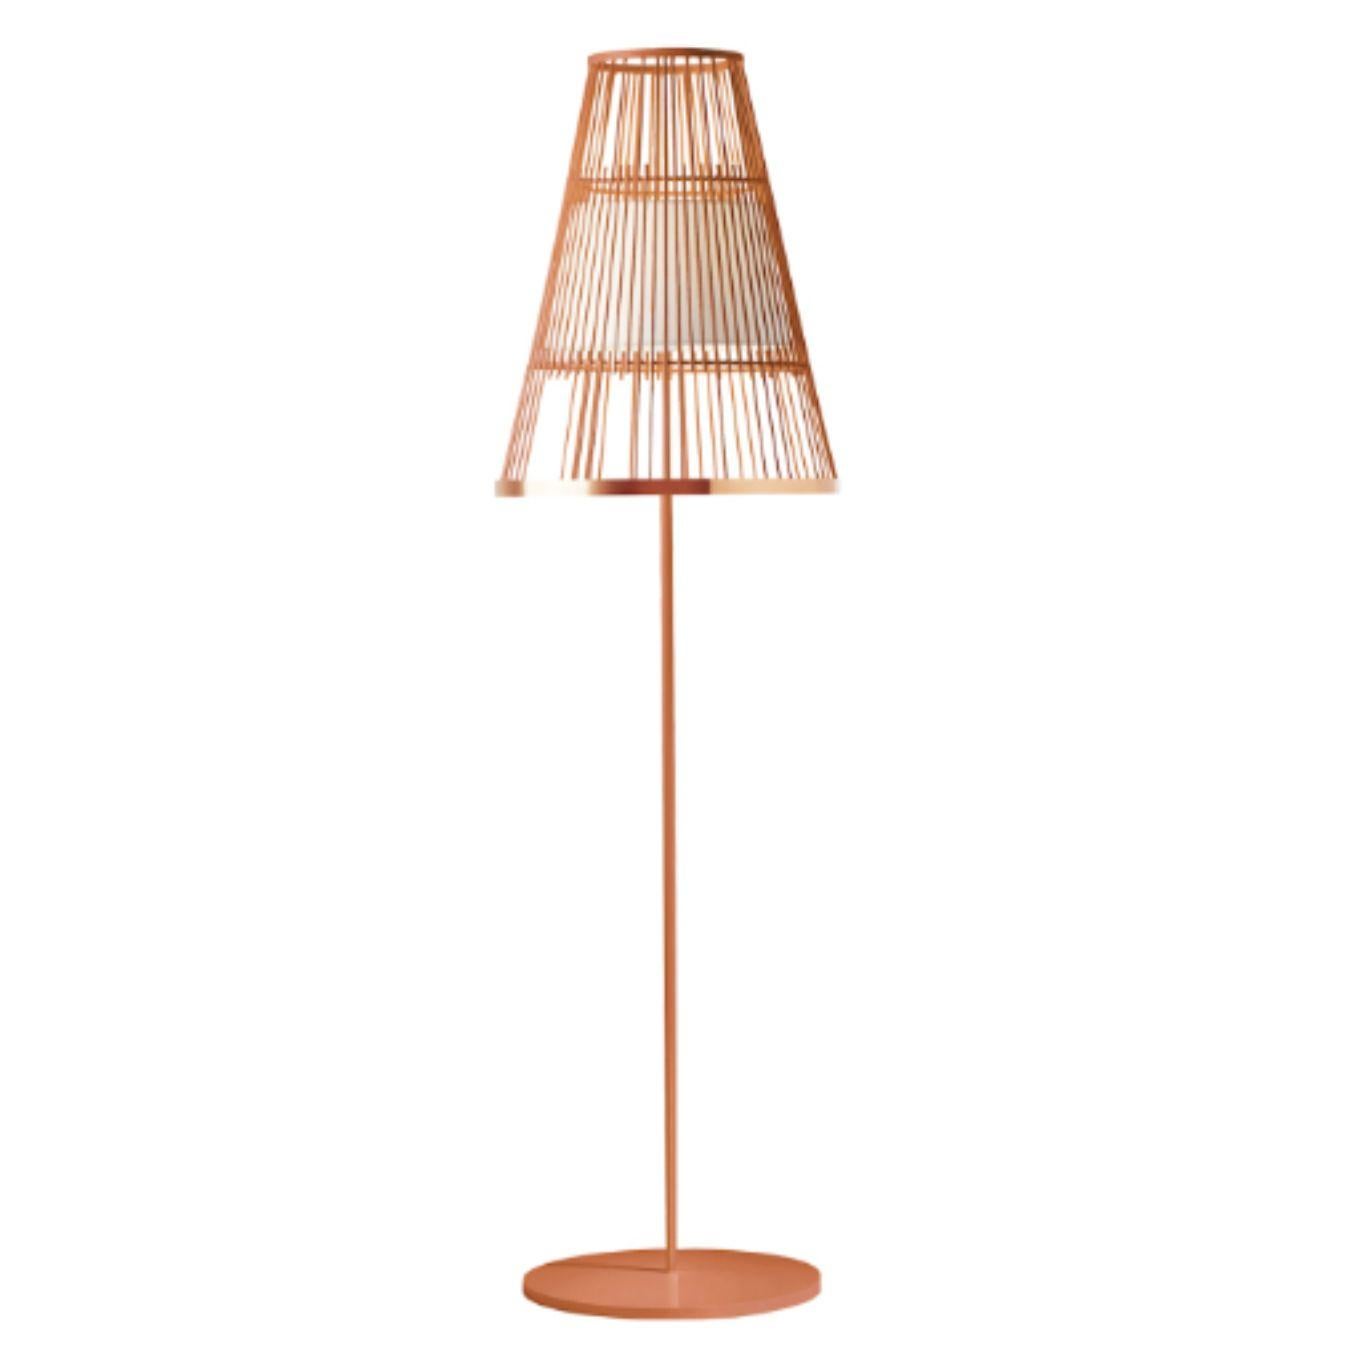 Salmon Up floor lamp with copper ring by Dooq
Dimensions: W 47 x D 47 x H 170 cm
Materials: lacquered metal, polished or brushed metal, copper.
Abat-jour: cotton
Also available in different colors and materials.

Information:
230V/50Hz
E27/1x20W